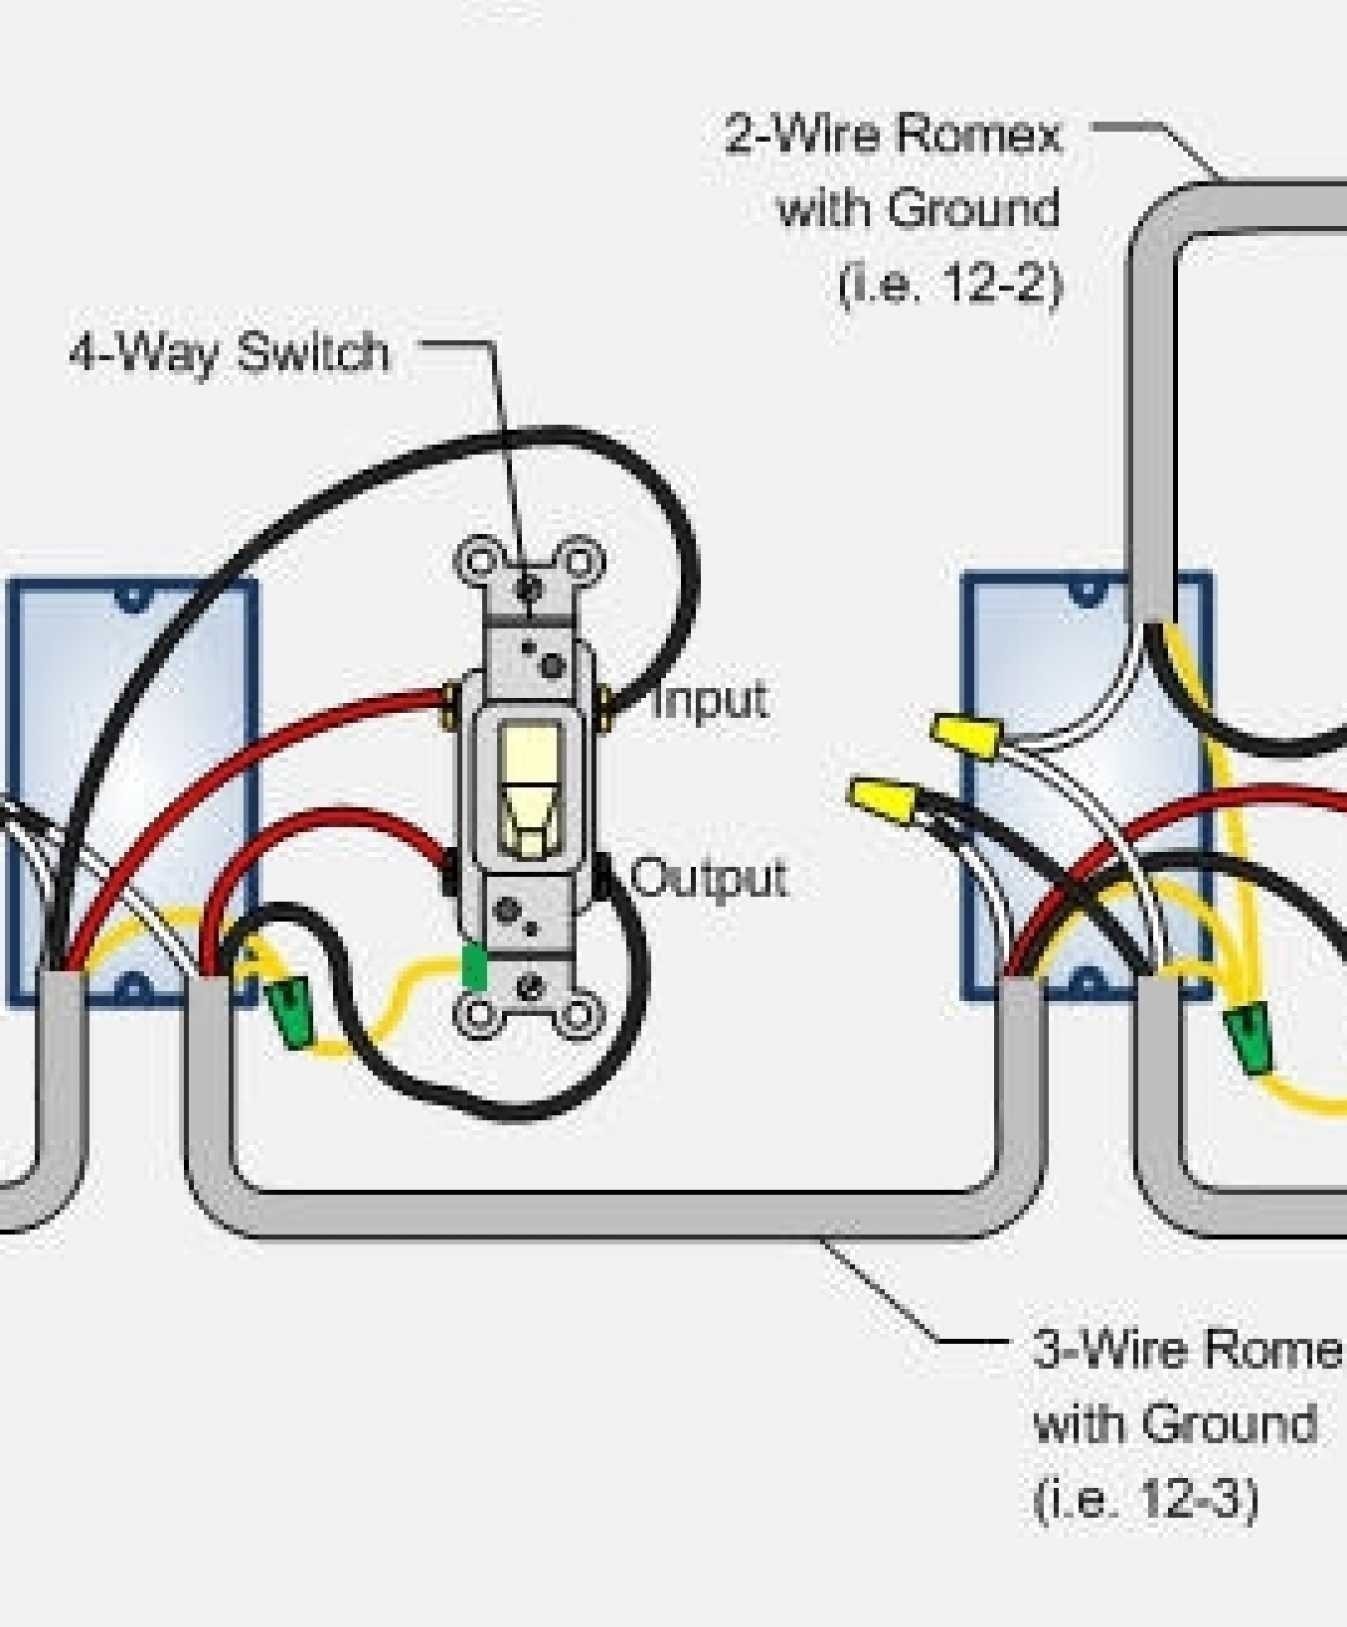 Wiring Diagram 3 Way Light Switch Awesome Wiring Diagram for Multiple Light Fixtures 2019 Wiring